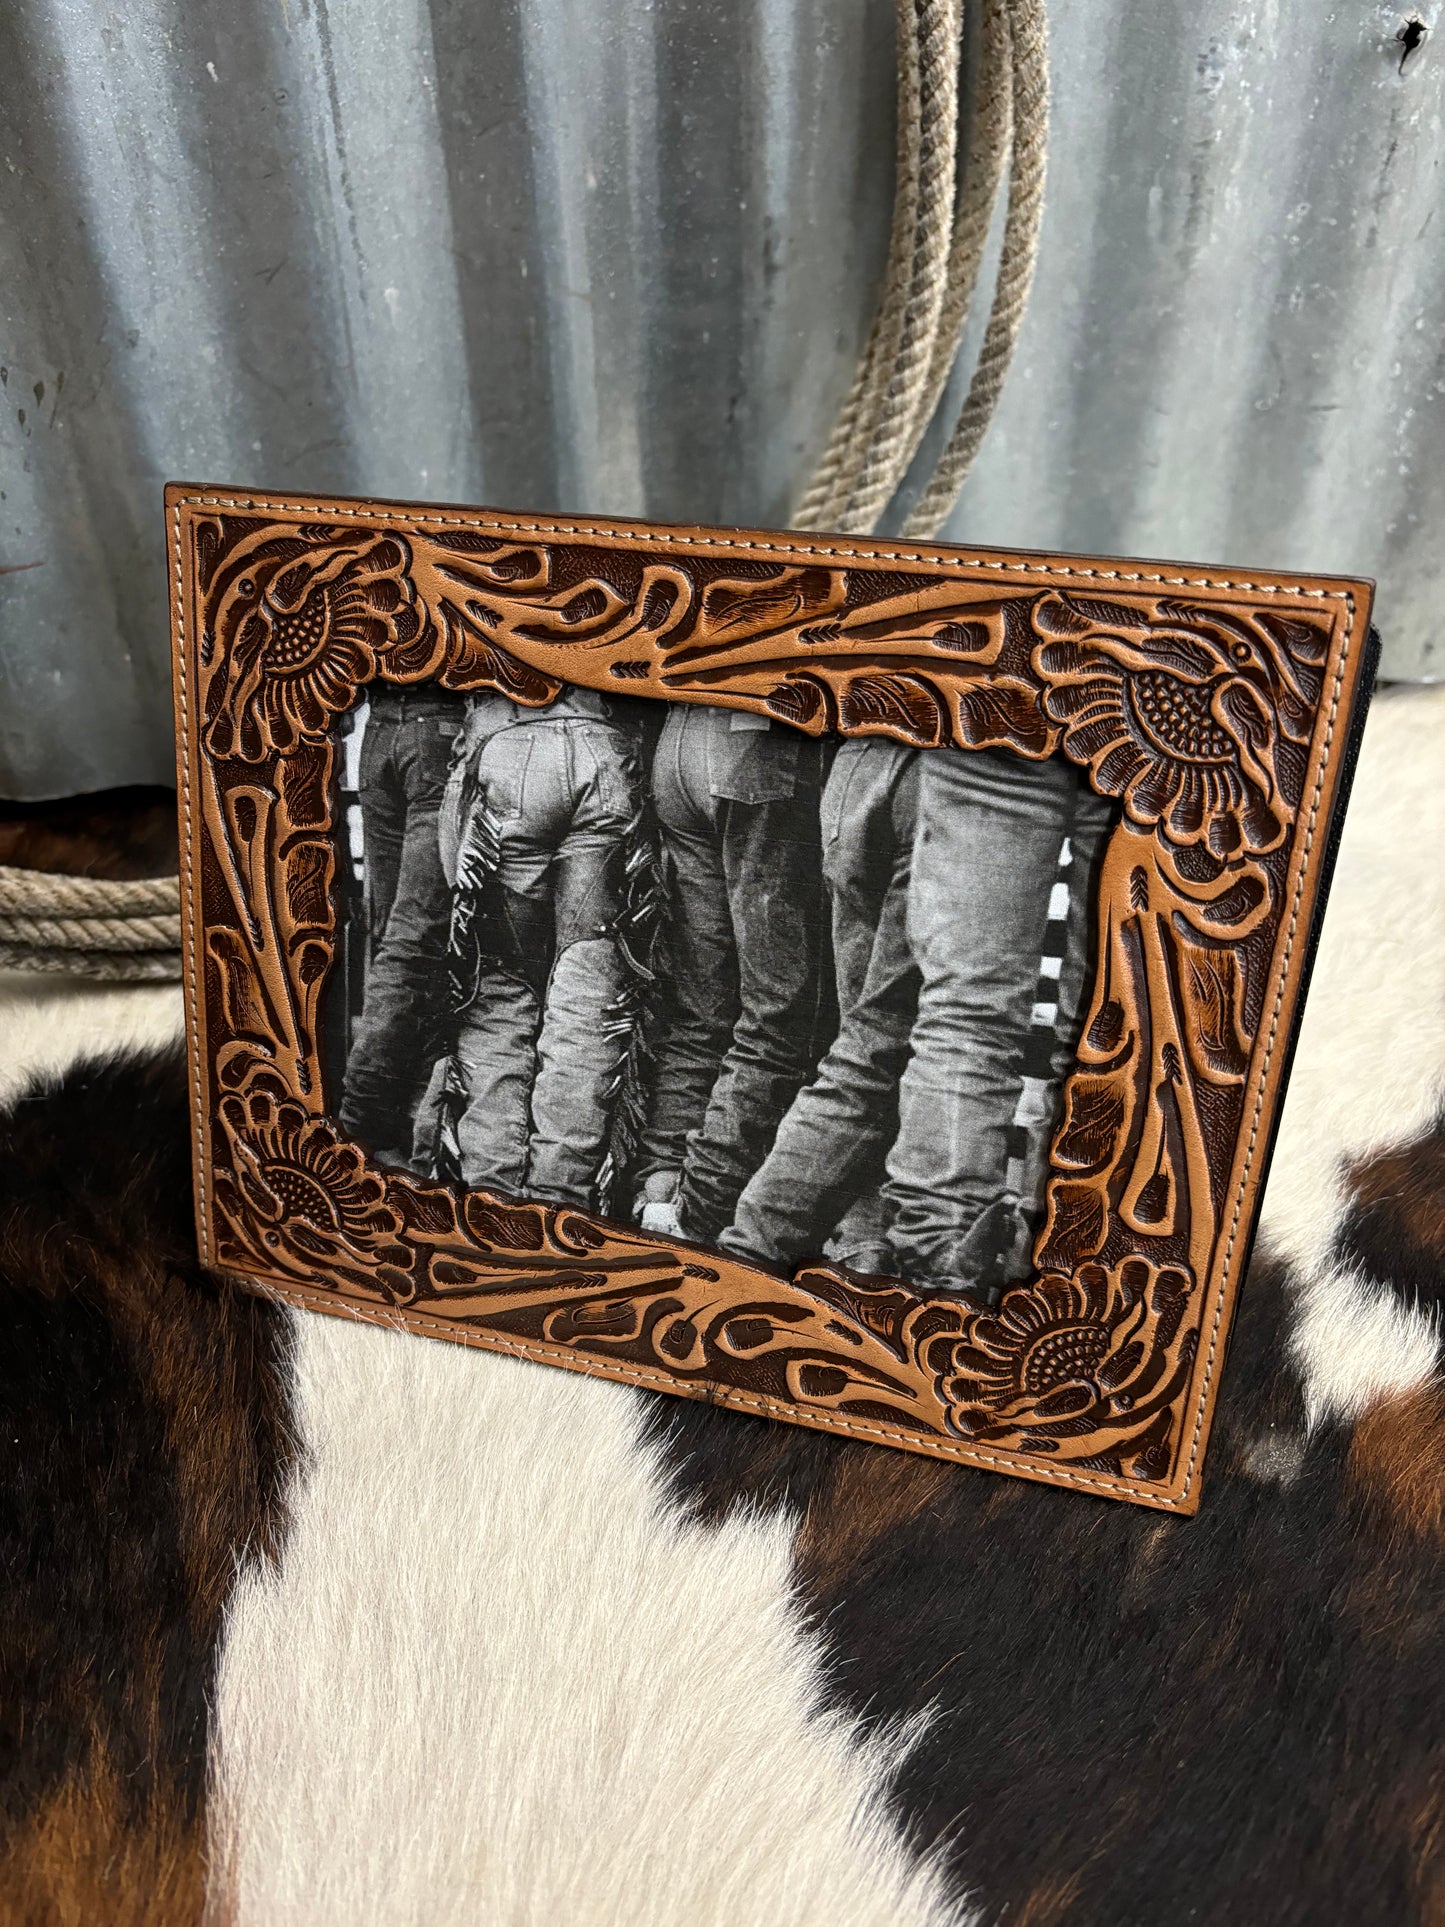 The Tooled Leather Natural Large Frame